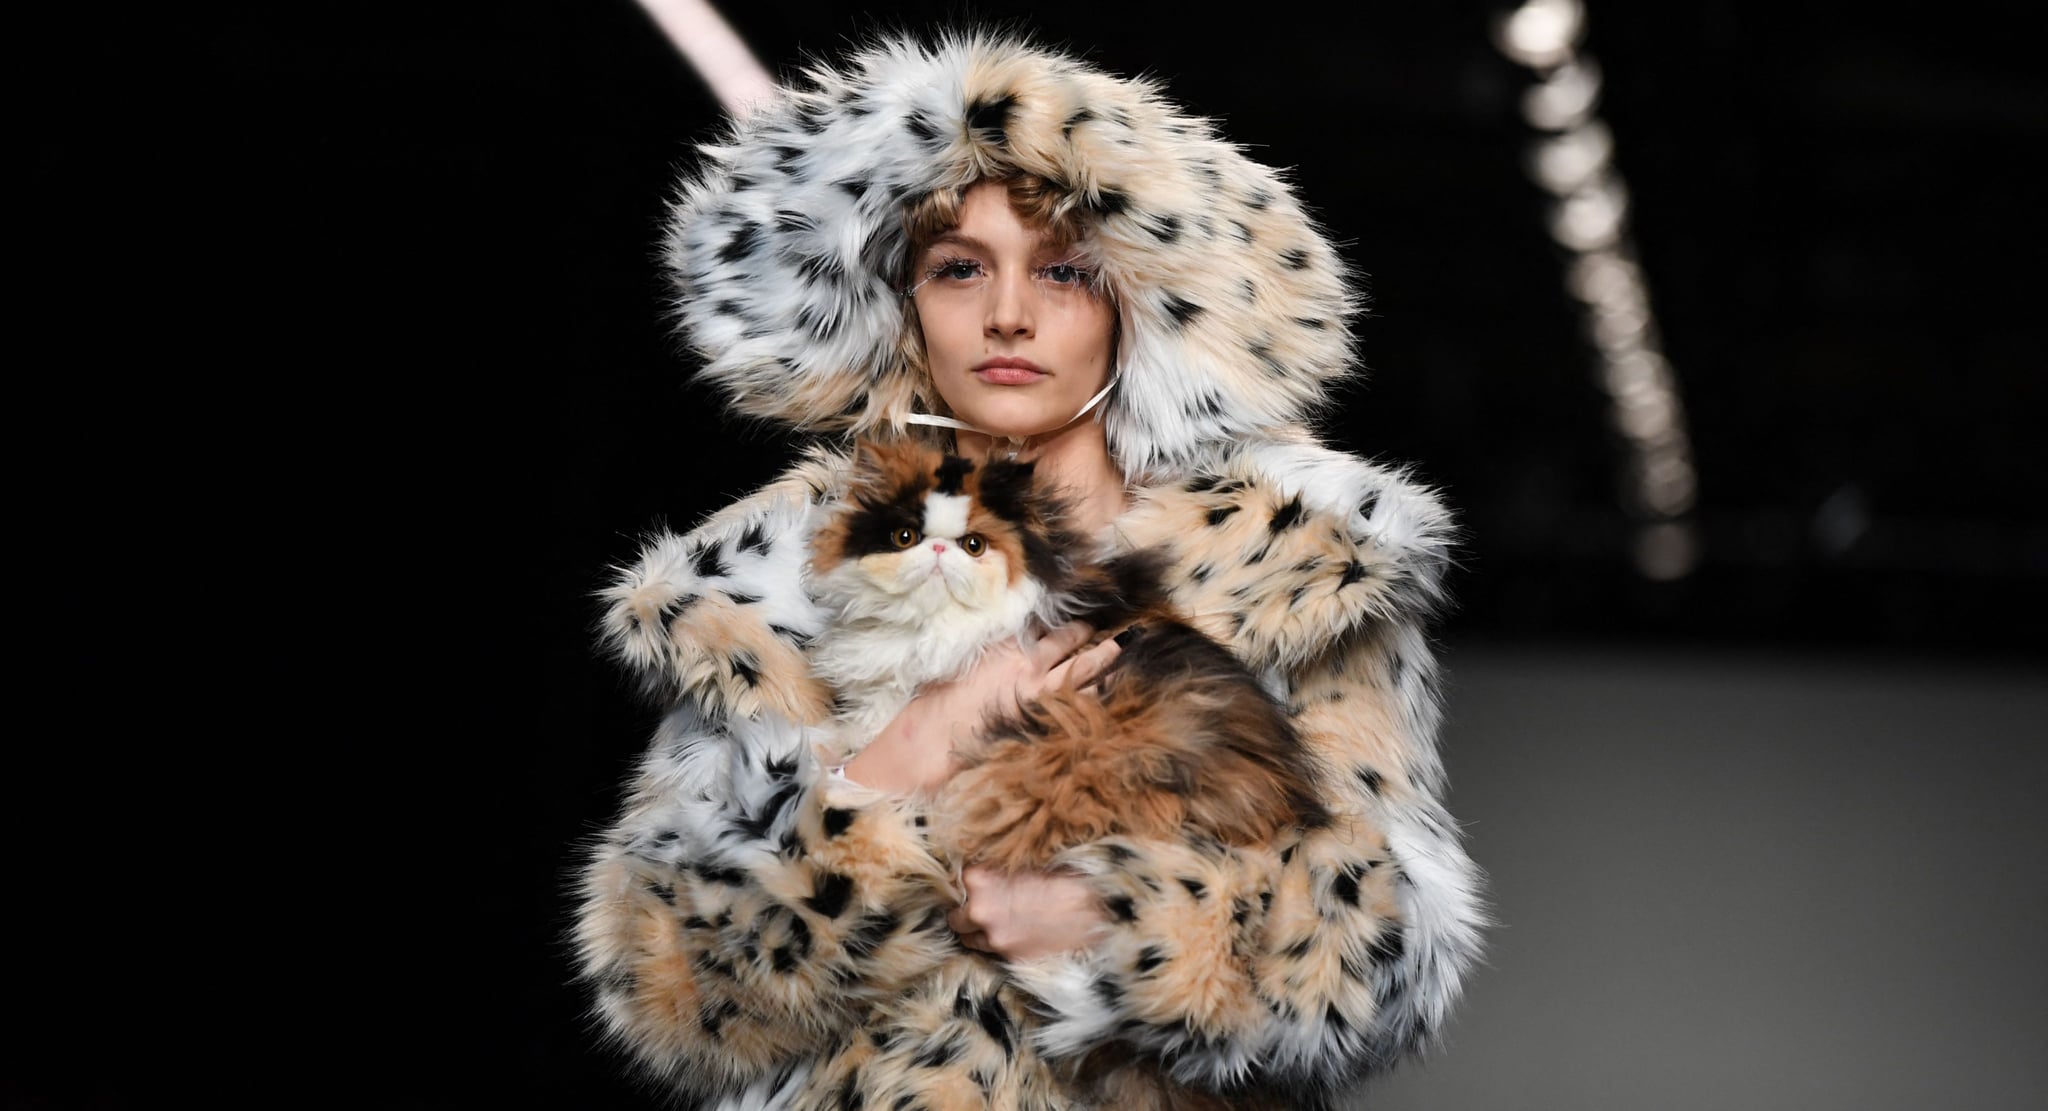 TOPSHOT - A model presents a creation by Chinese designer Yuhan Wang during the catwalk show for the Autumn/Winter 2022 collection on the third day of London Fashion Week in London on February 20, 2022. - RESTRICTED TO EDITORIAL USE (Photo by Daniel LEAL / AFP) / RESTRICTED TO EDITORIAL USE (Photo by DANIEL LEAL/AFP via Getty Images)